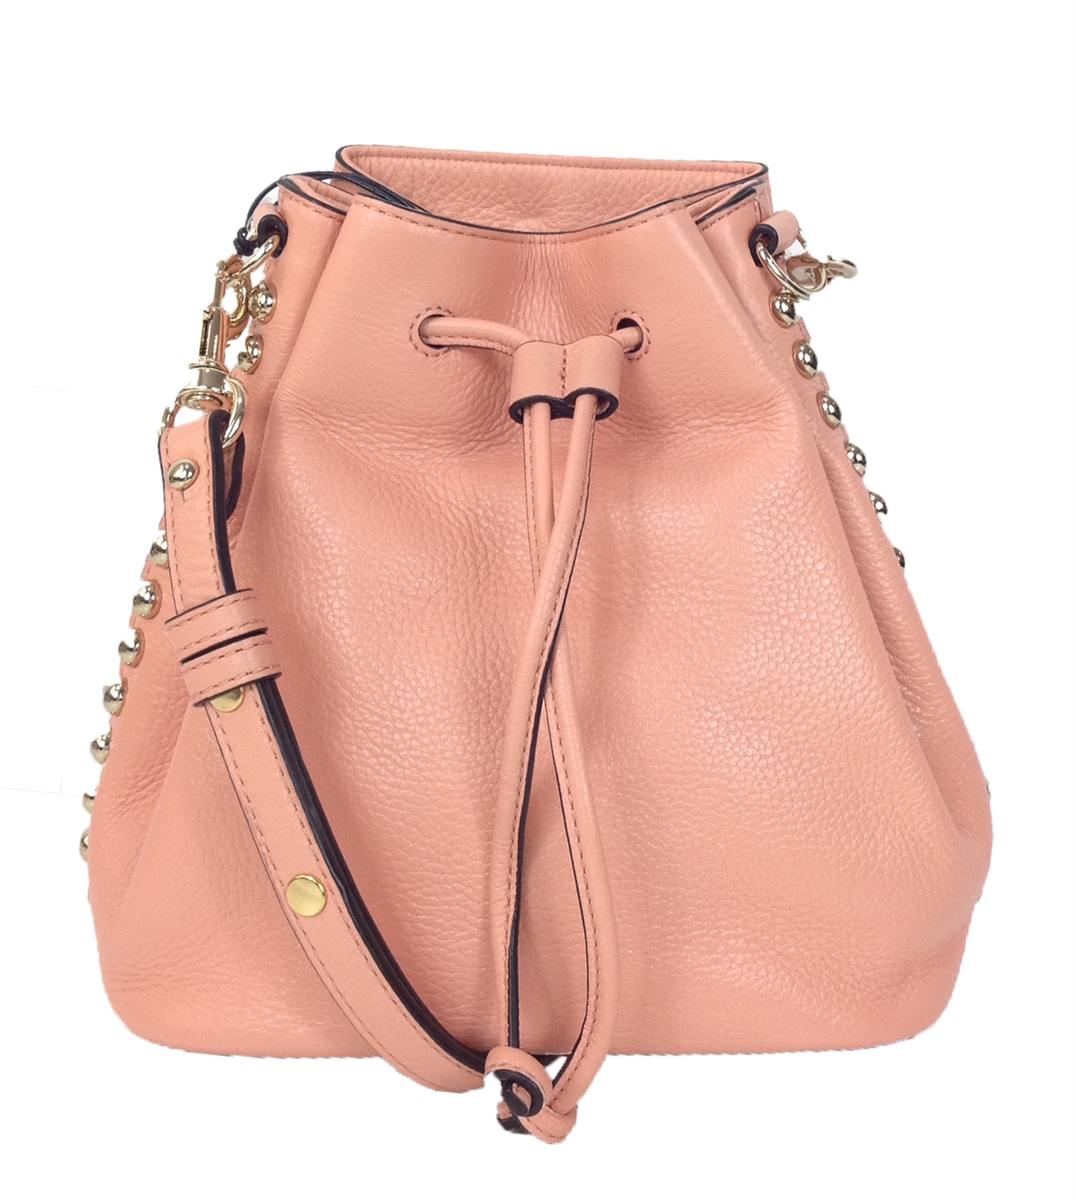 Apricot Genuine Leather Top Handle Minimalist Bucket Bag with Wide Strap